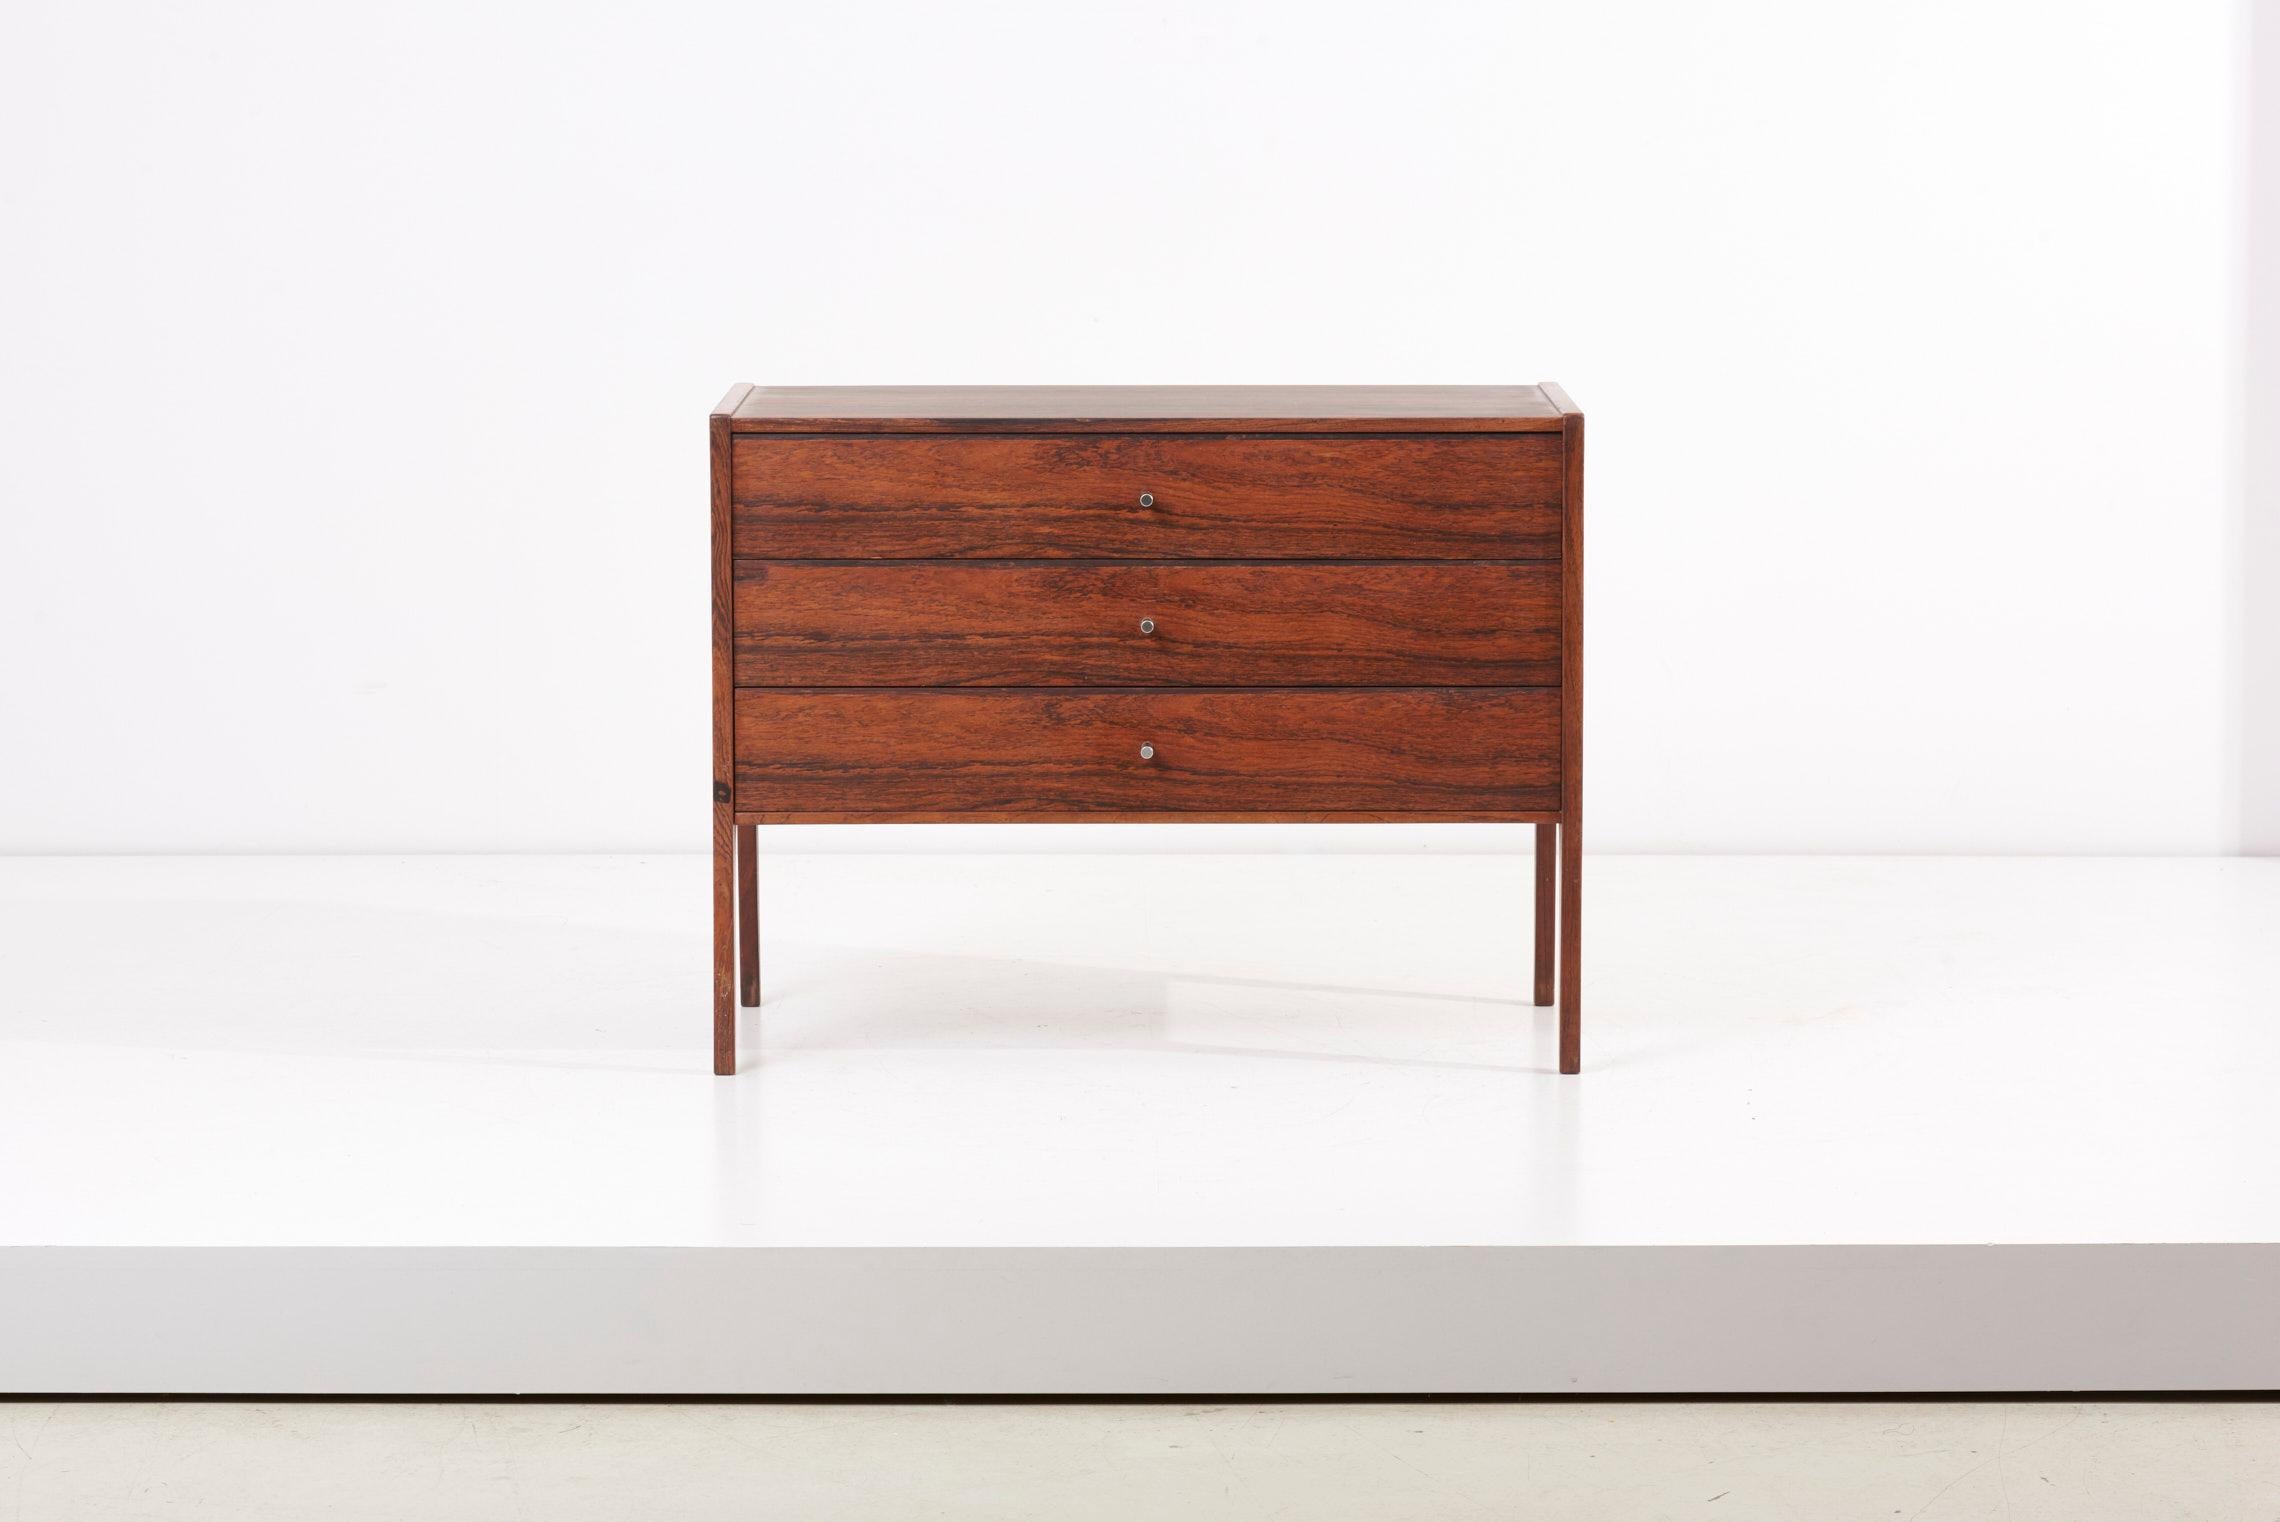 Wooden chest of drawers or dresser, model No. 34 by Kai Kristiansen manufactured by Aksel Kjersgaard in Denmark. Stamped.